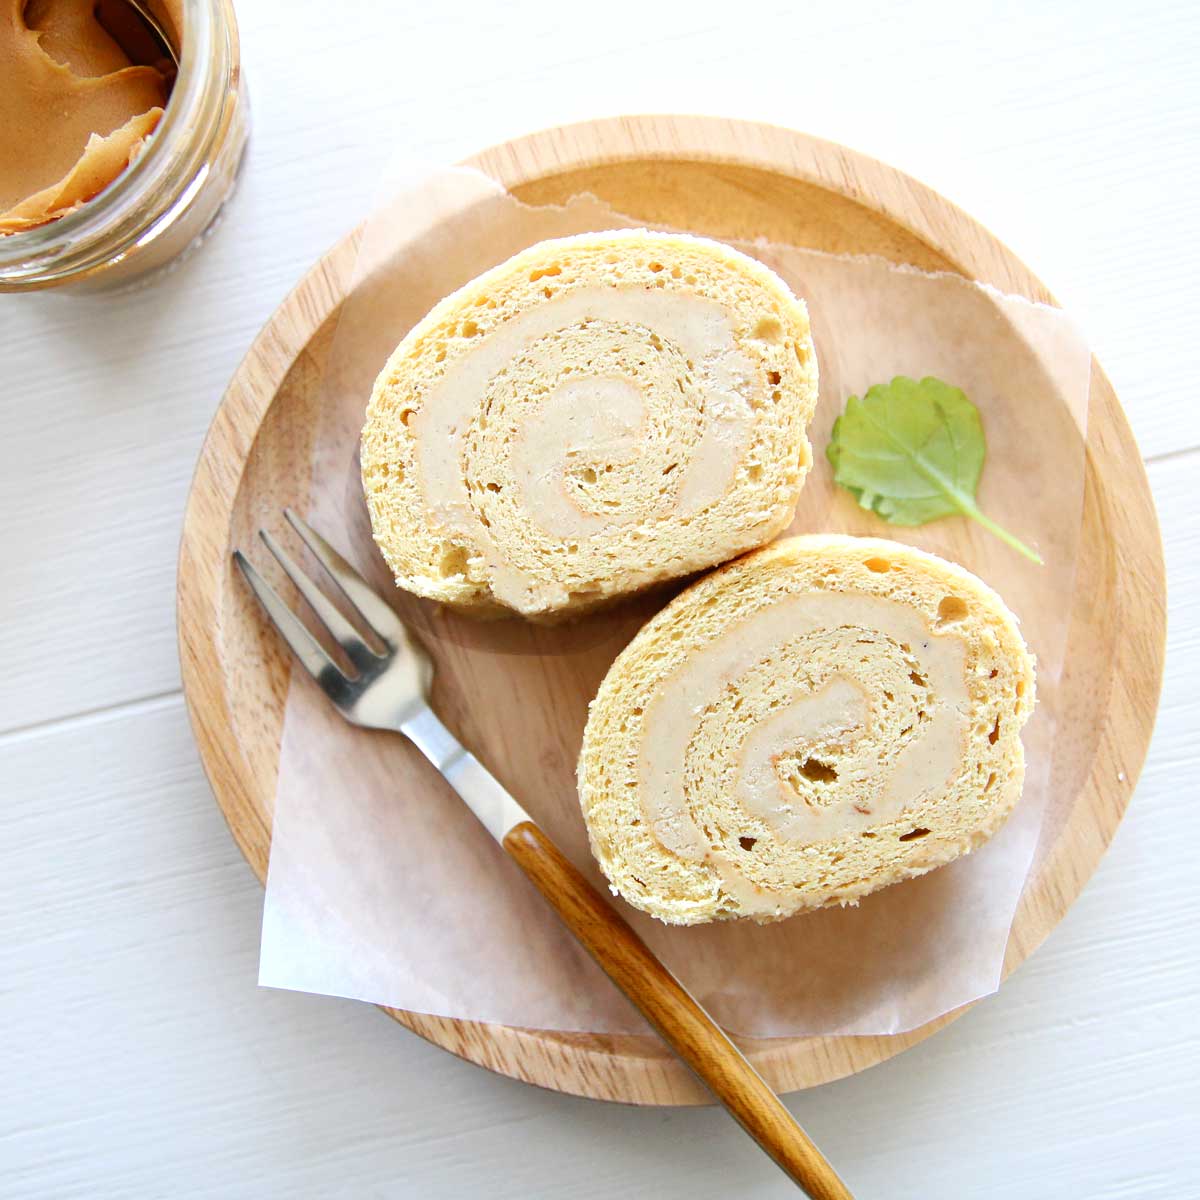 Flourless Peanut Butter Swiss Roll Cake with a Sweet Peanut Cream Filling - Strawberry Japanese Roll Cake